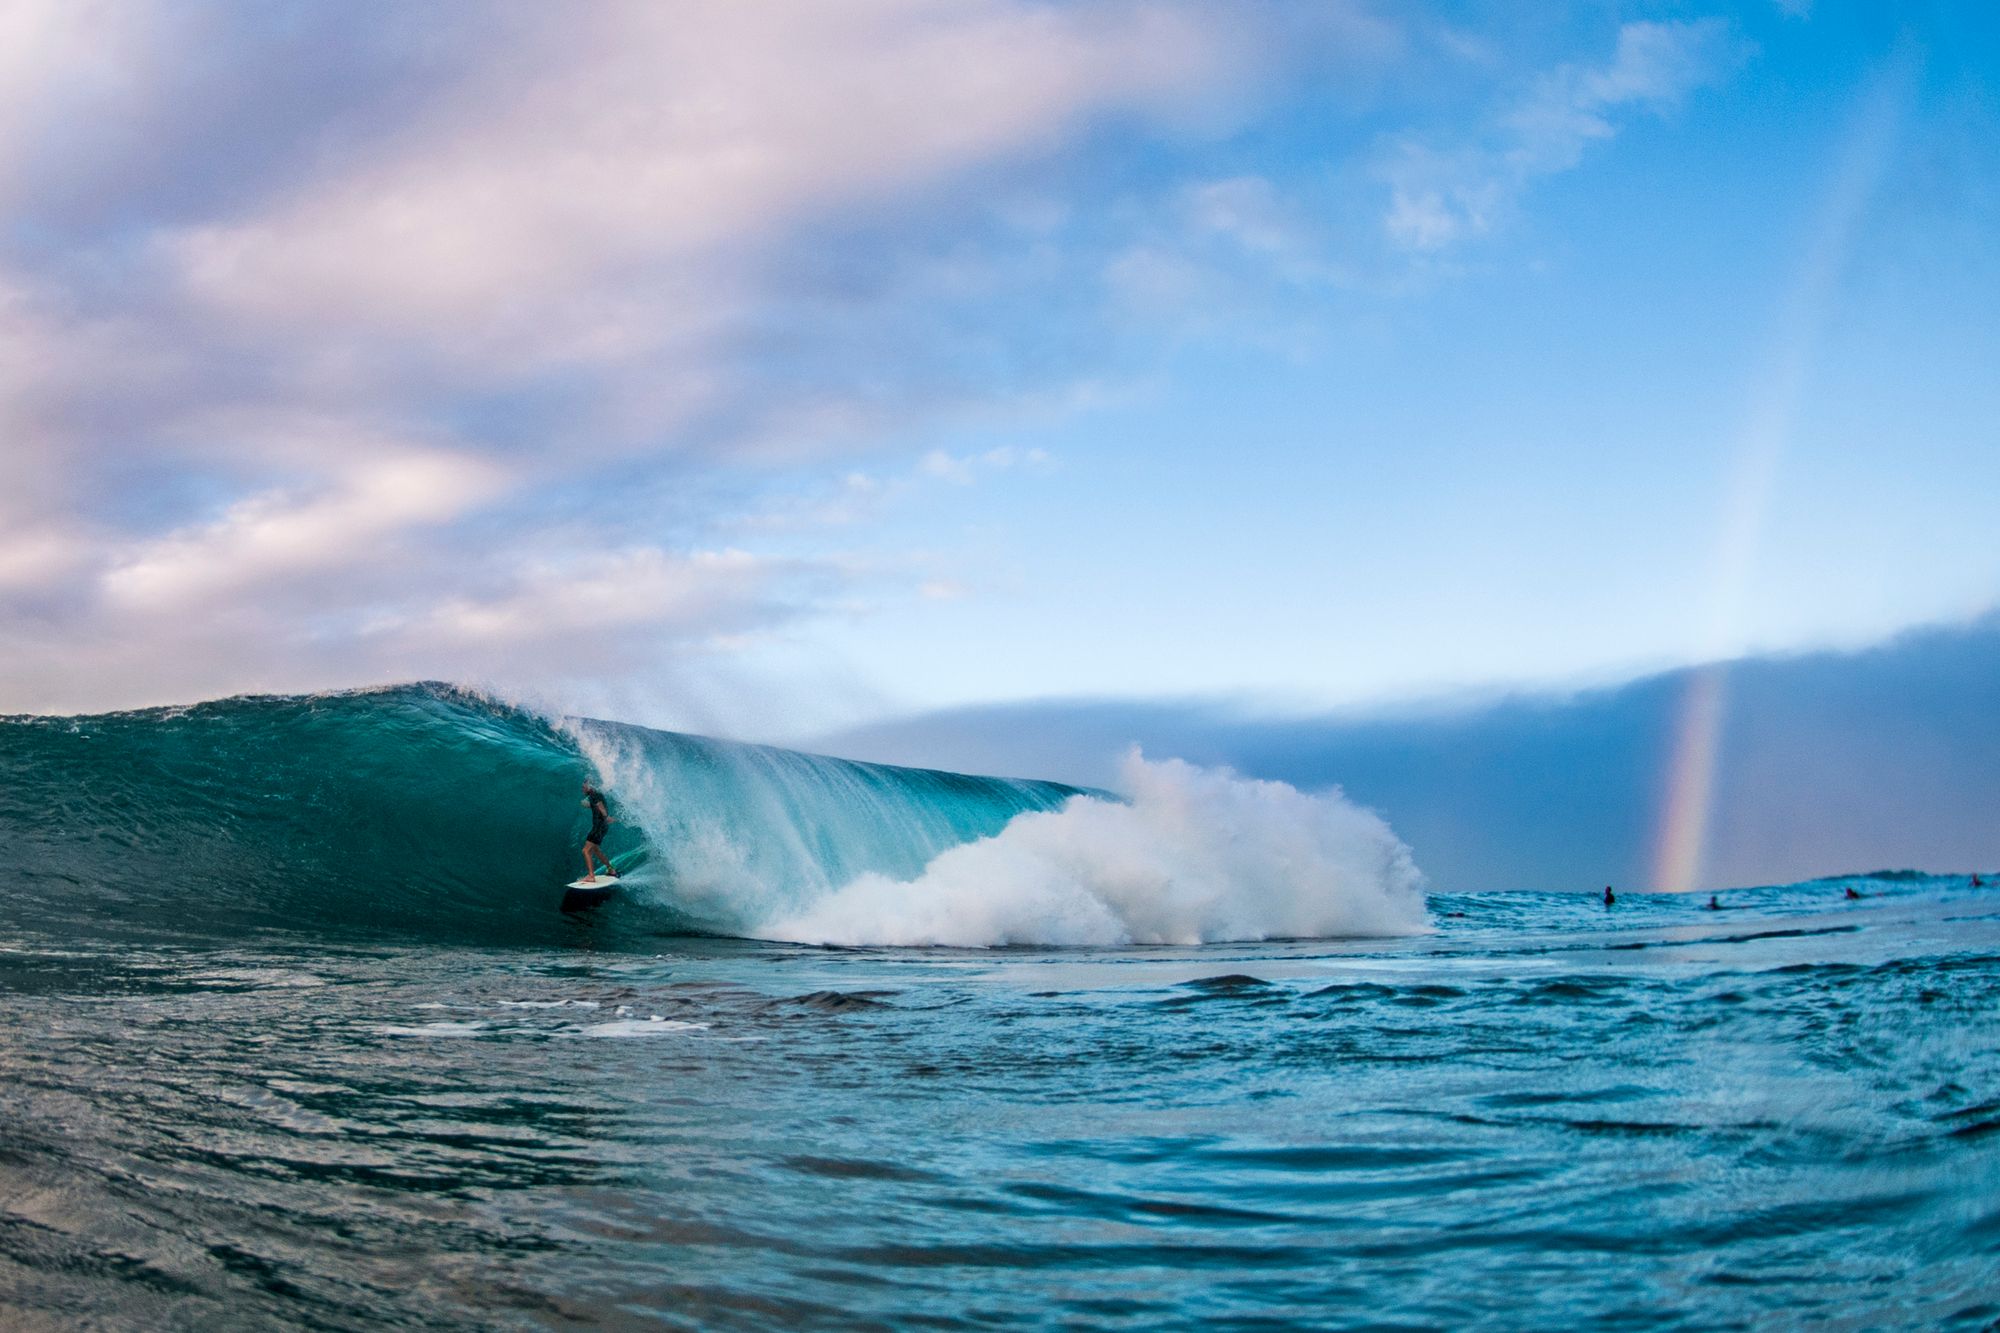 Oahu, one of the most consistent surf spots in the world